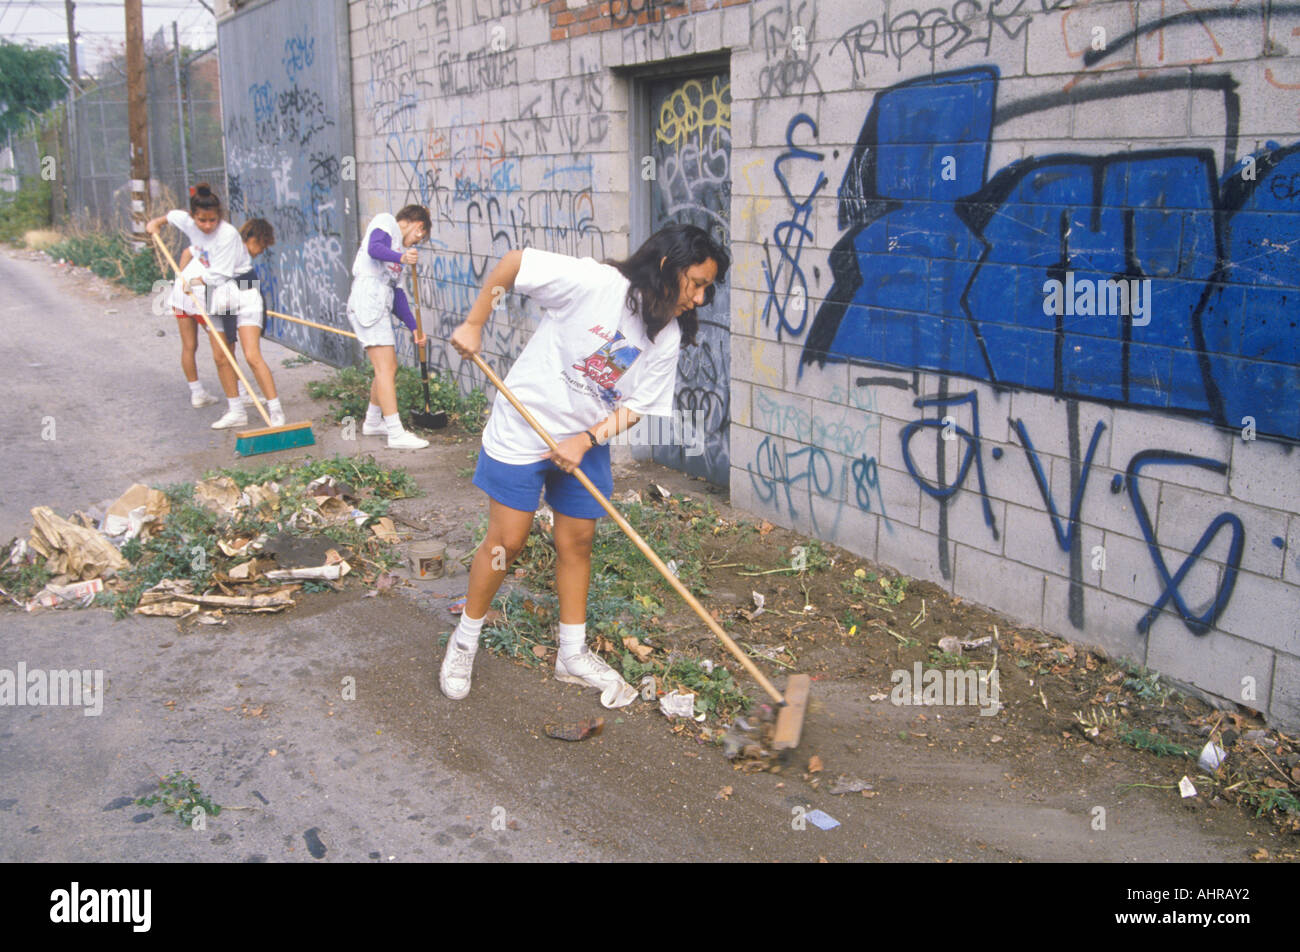 A group of young people participating in community cleanup by sweeping an alley Stock Photo